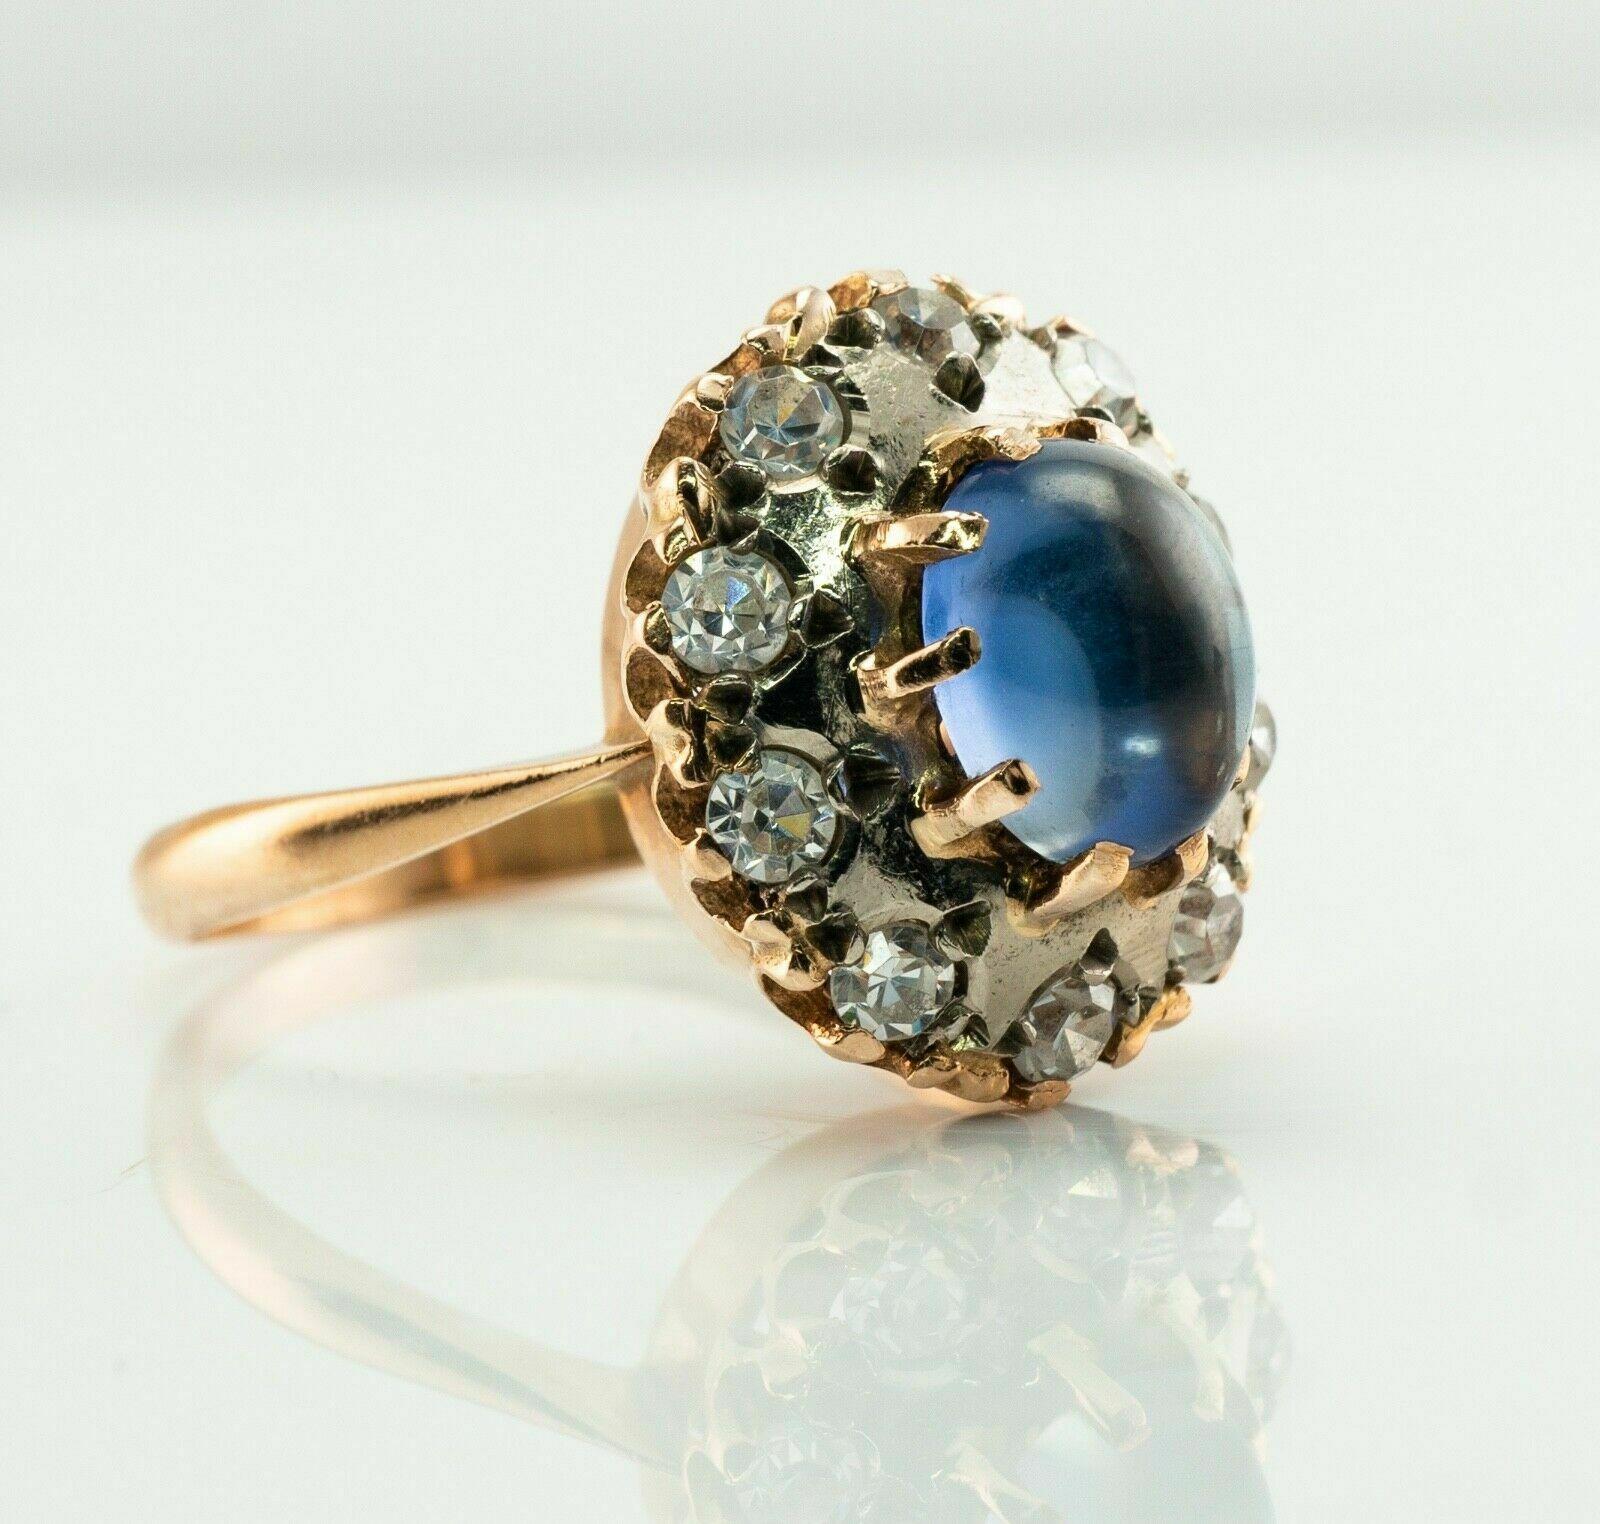 This ring has been made in Soviet Russia, Armenia. Circa 1980s.
The ring is crafted in solid 14K Pink Gold and 14K White gold for the top and has all USSR hallmarks.  
The center synthetic blue Sapphire cabochon measures 8mm x 6mm.
Ten white and